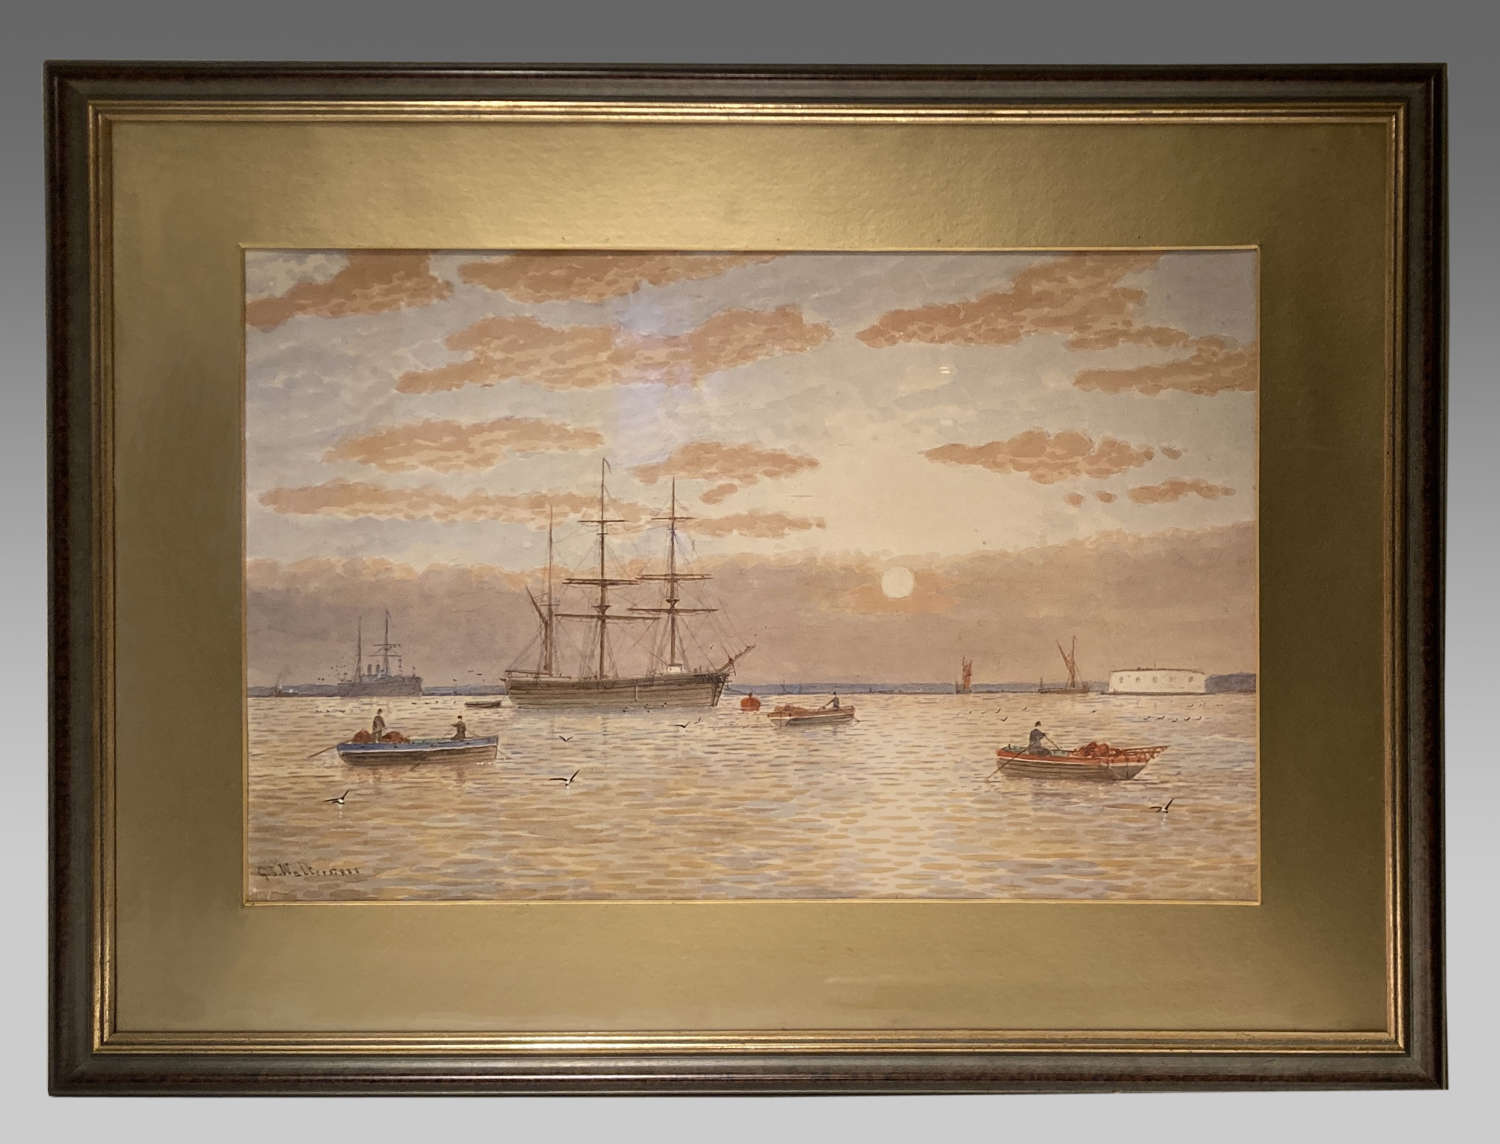 Watercolour, Medway Estuary by George Stanfield Walters, RBA